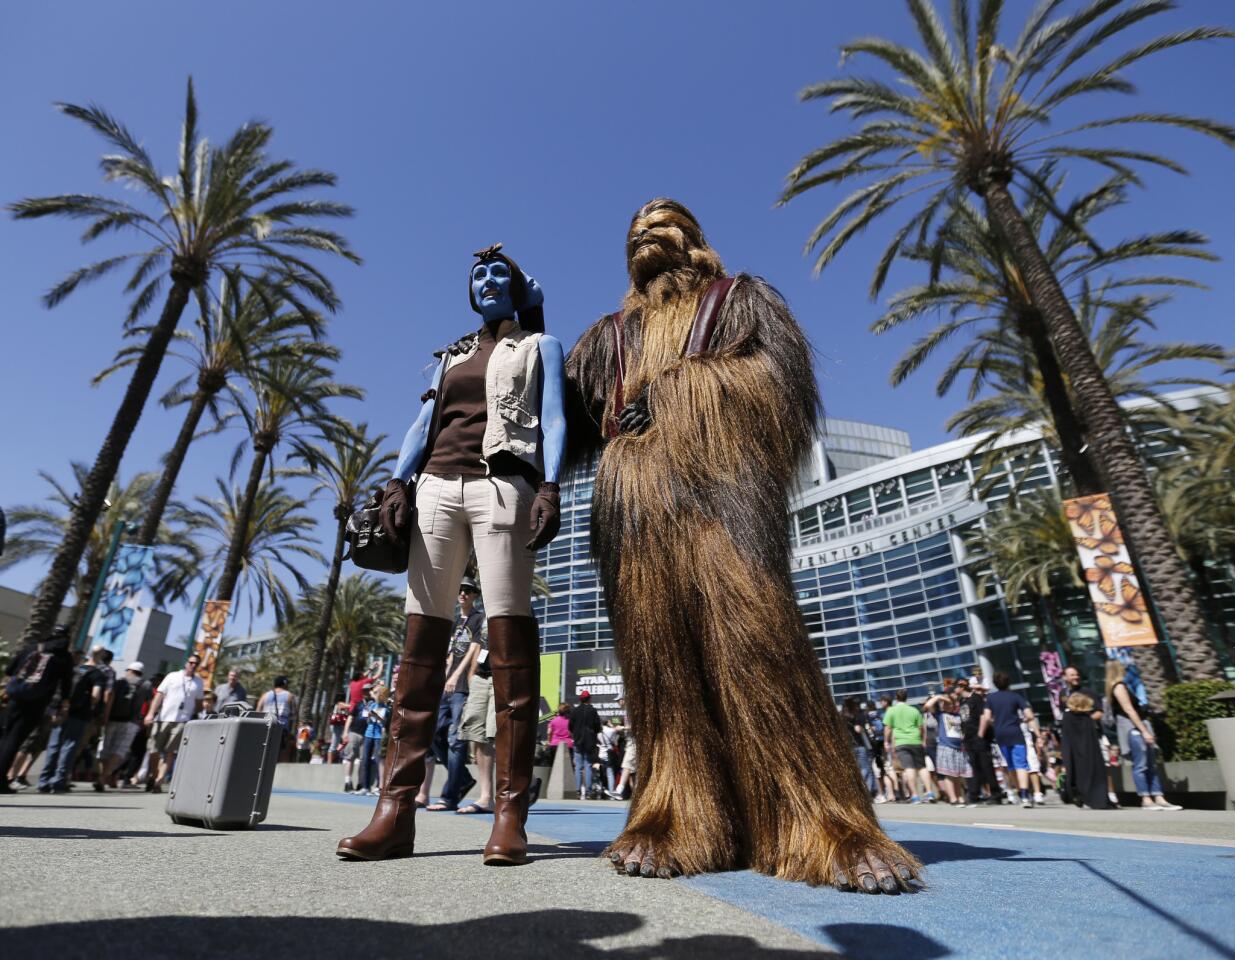 "Star Wars" fans Sharon Jackson, left, dressed as Mission Vao, of Las Vegas, and Kyle Jackson, dressed as a Wookiee, pose for pictures during the 2015 Star Wars Celebration at the Anaheim Convention Center on April 16.